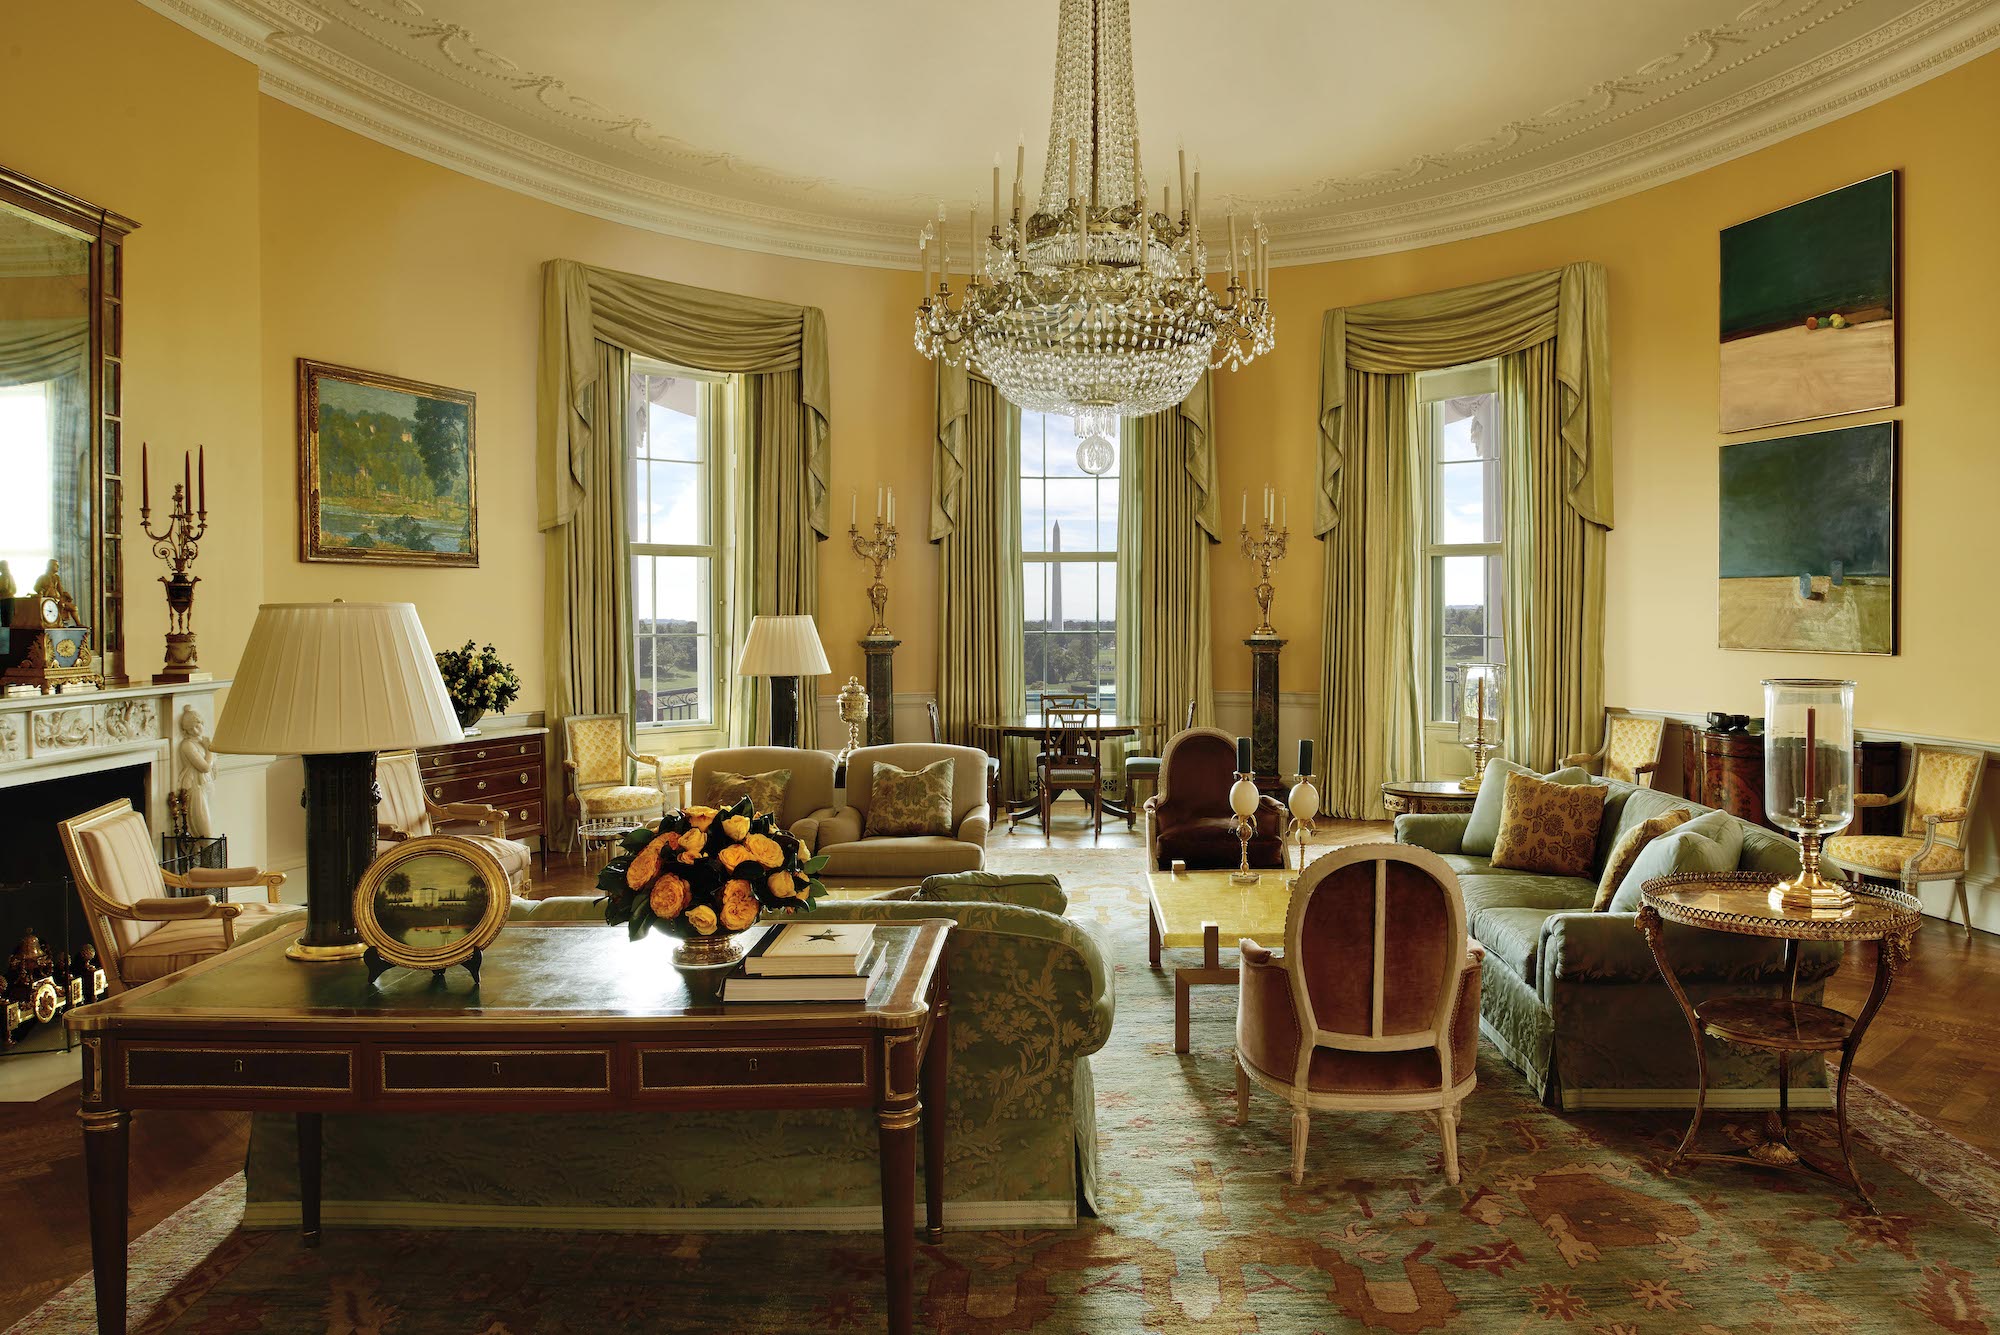 President Obama asked photographer Michael Mundy to photograph his public and private rooms during his tenure in The White House